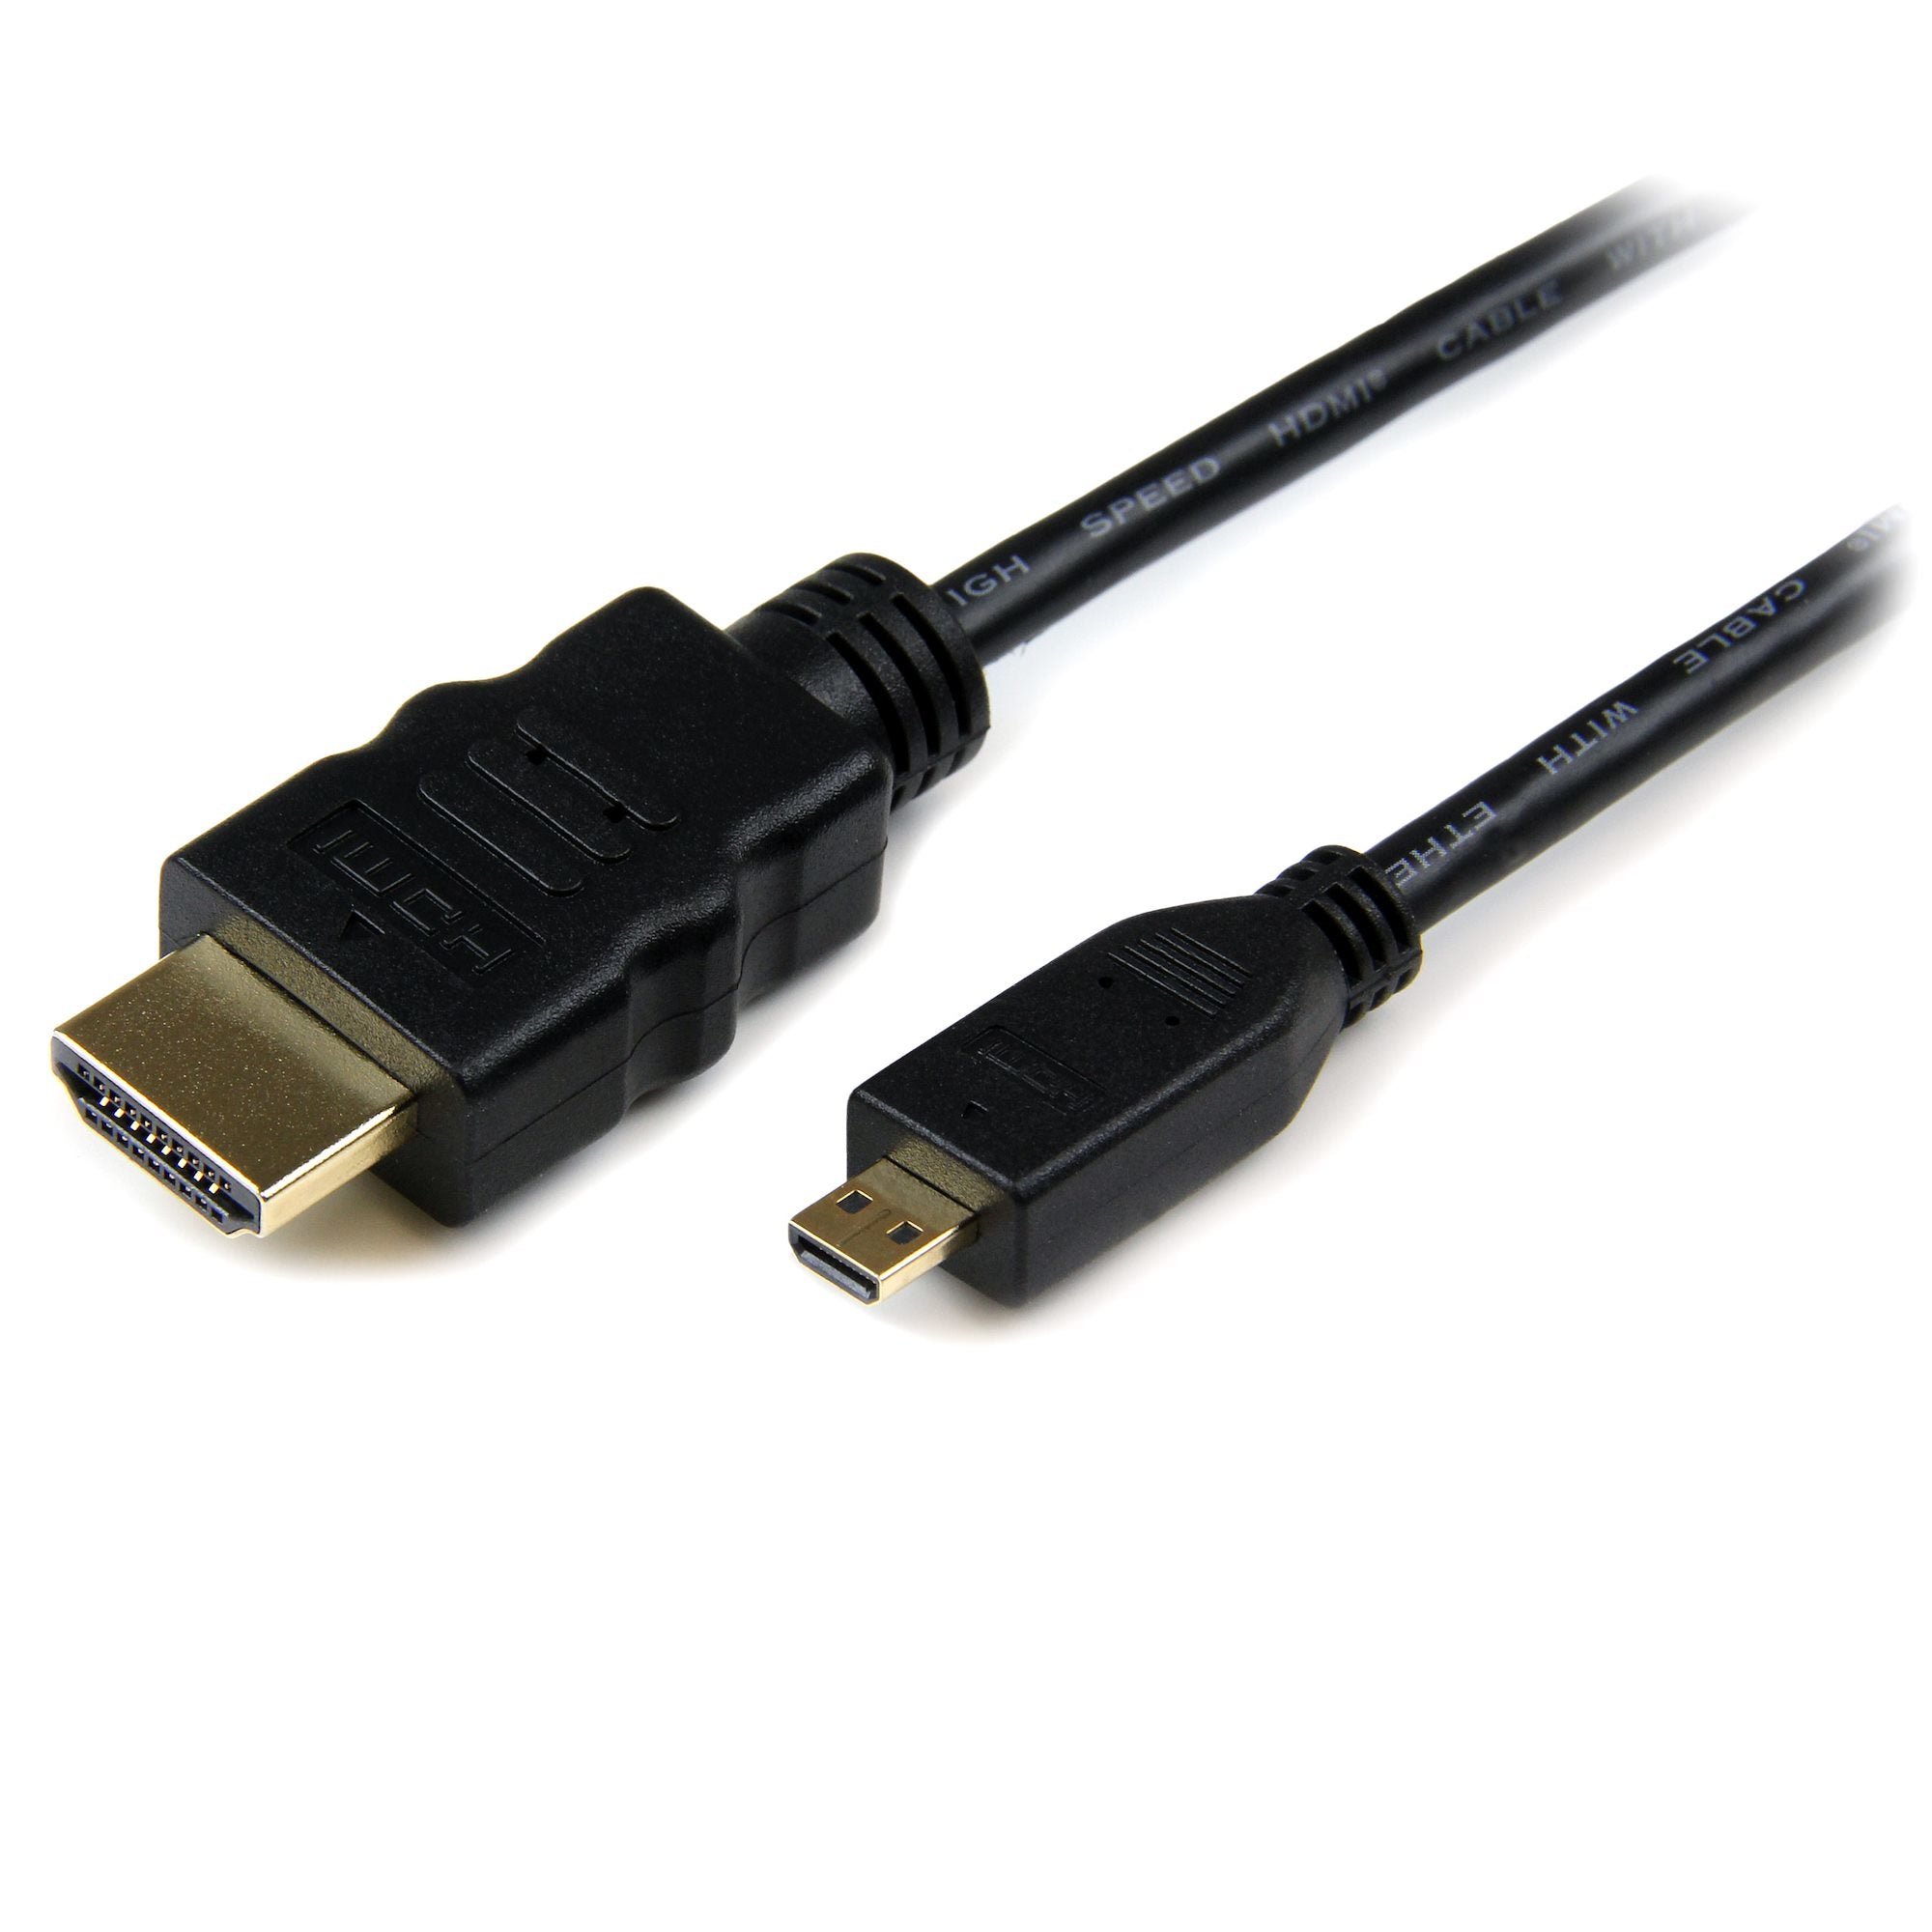 StarTech.com 1m Micro HDMI to HDMI Cable with Ethernet - 4K 30Hz Video - Durable High Speed Micro HDMI Type-D to HDMI 1.4 Adapter Cable/Converter Cord - UHD HDMI Monitors/TVs/Displays - M/M